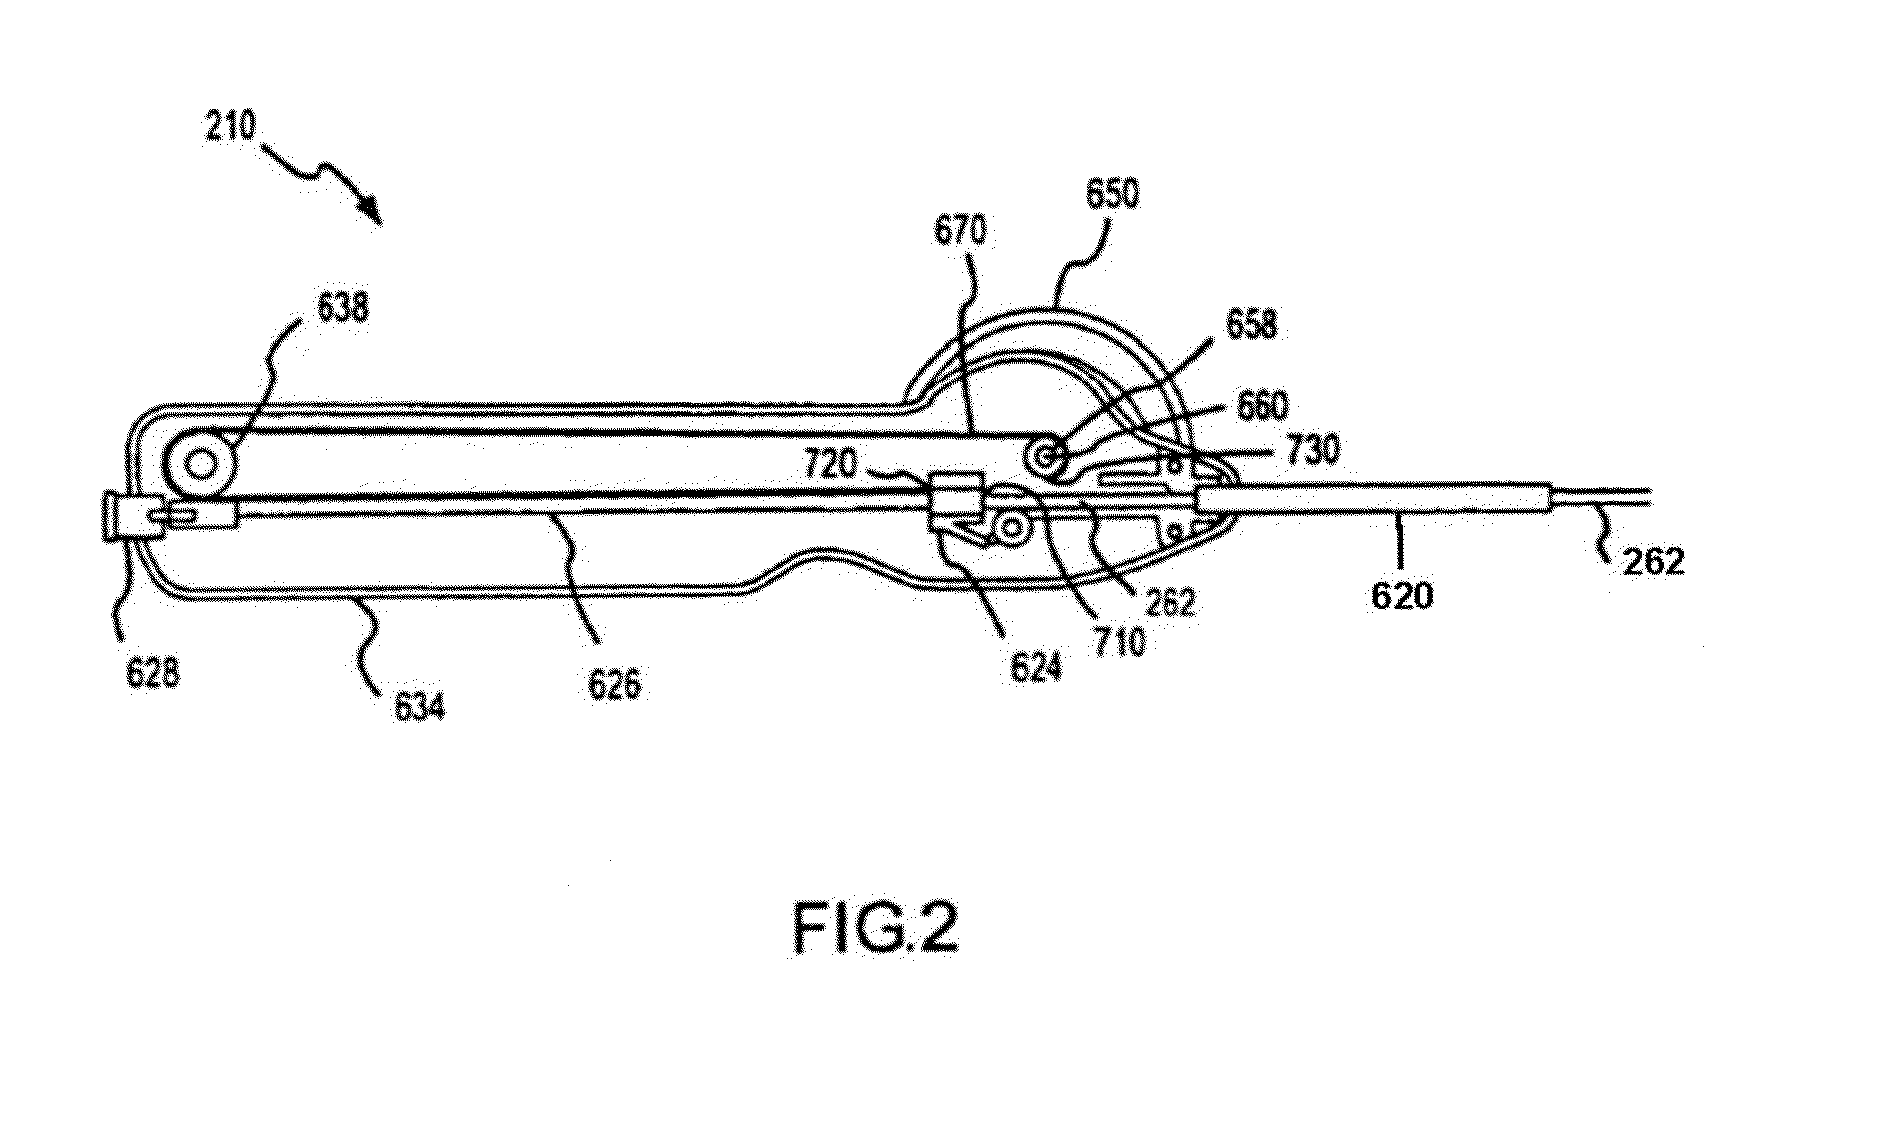 Variable speed stent delivery system